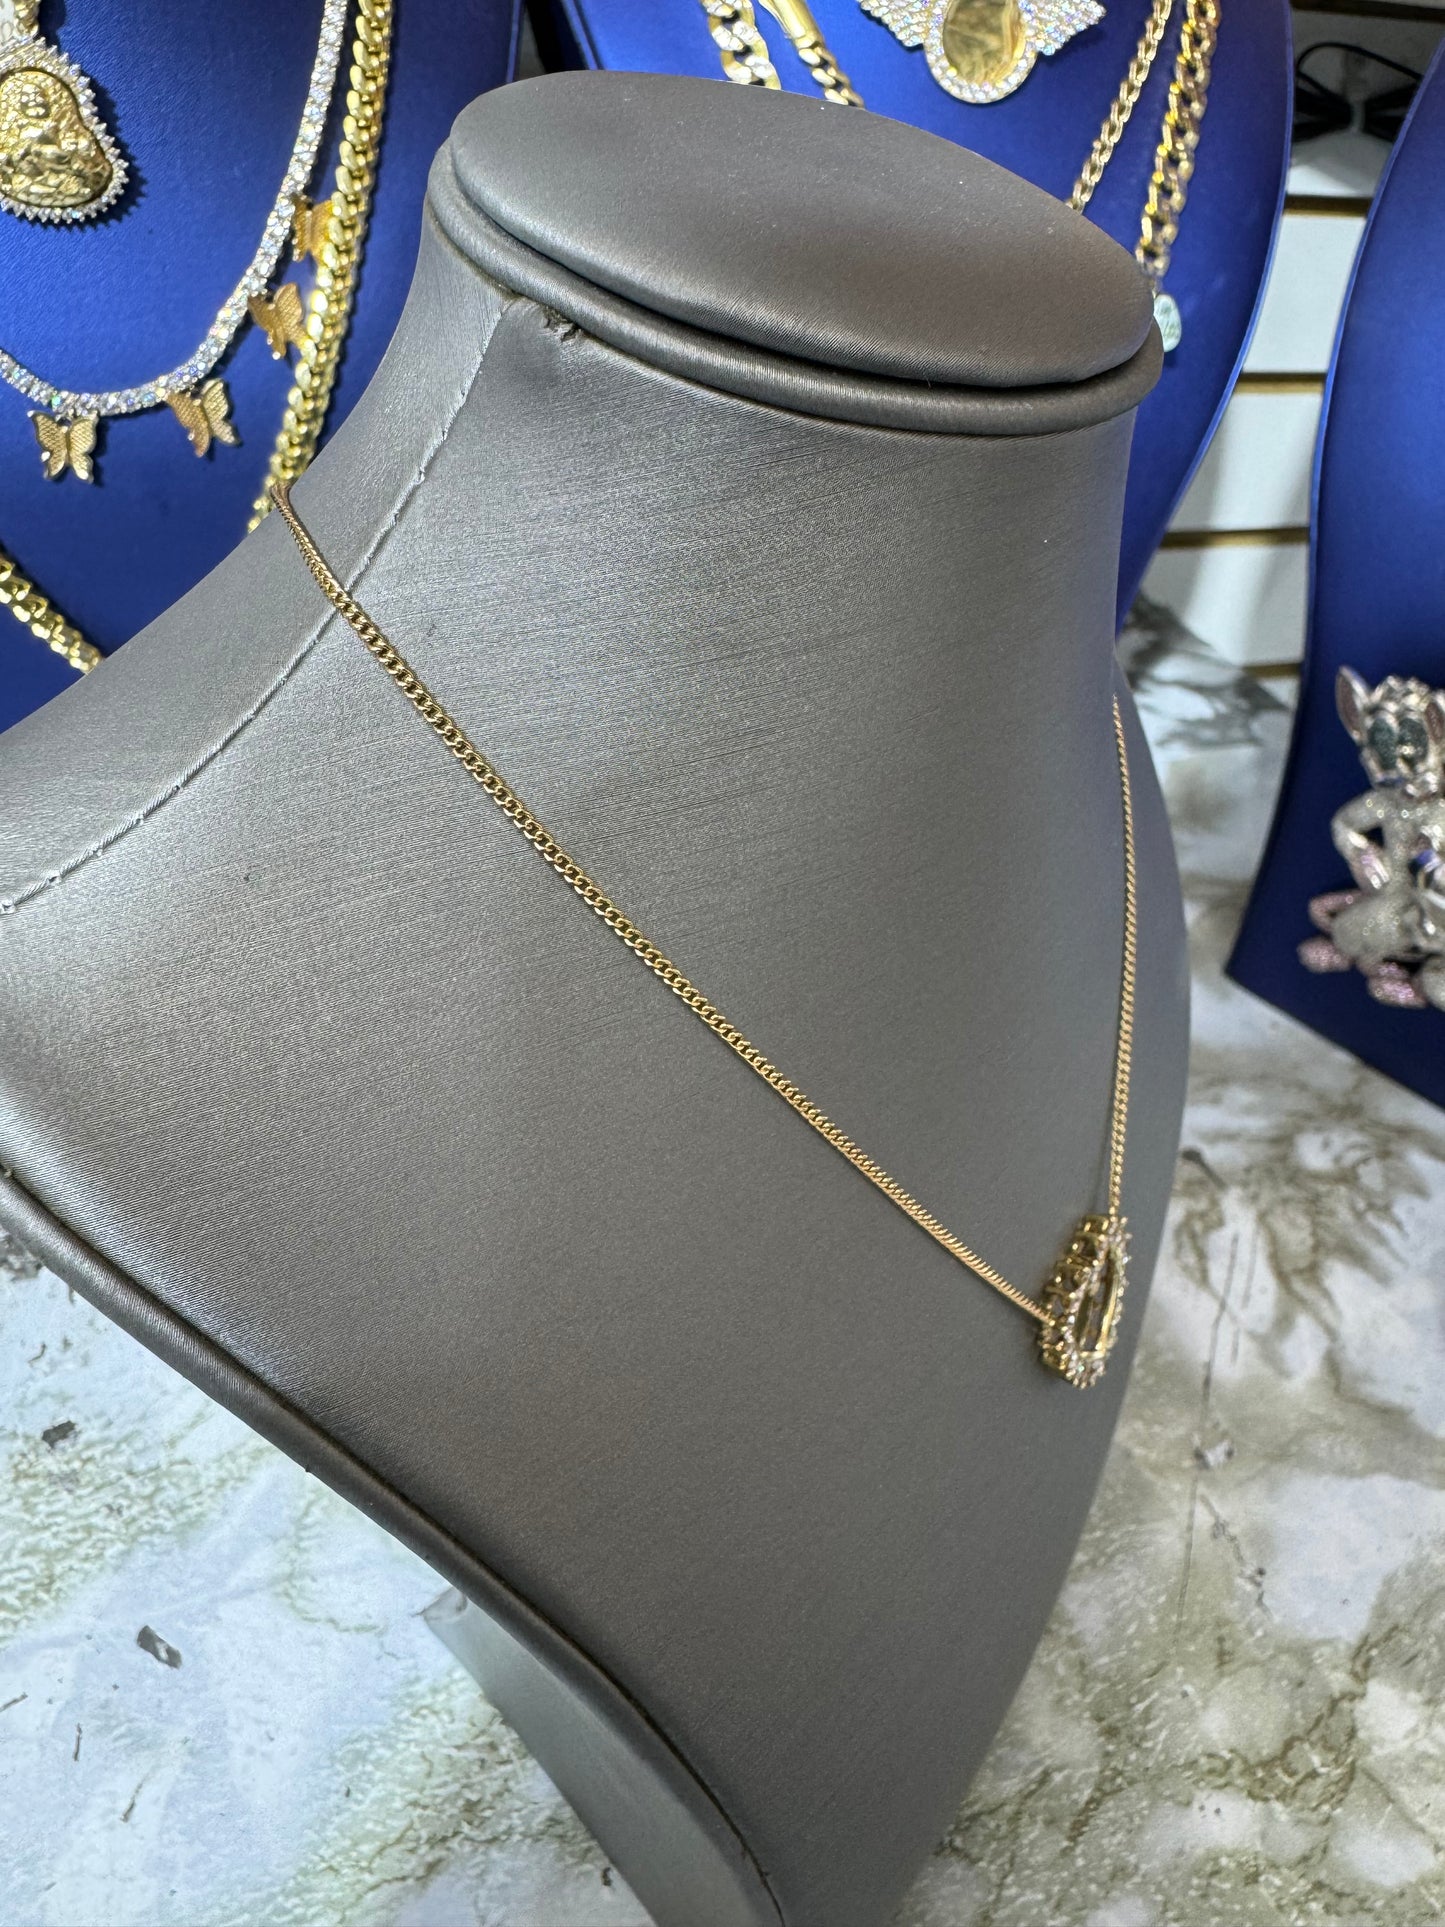 14K Gold Chain & 14K Gold Pendant With Diamonds